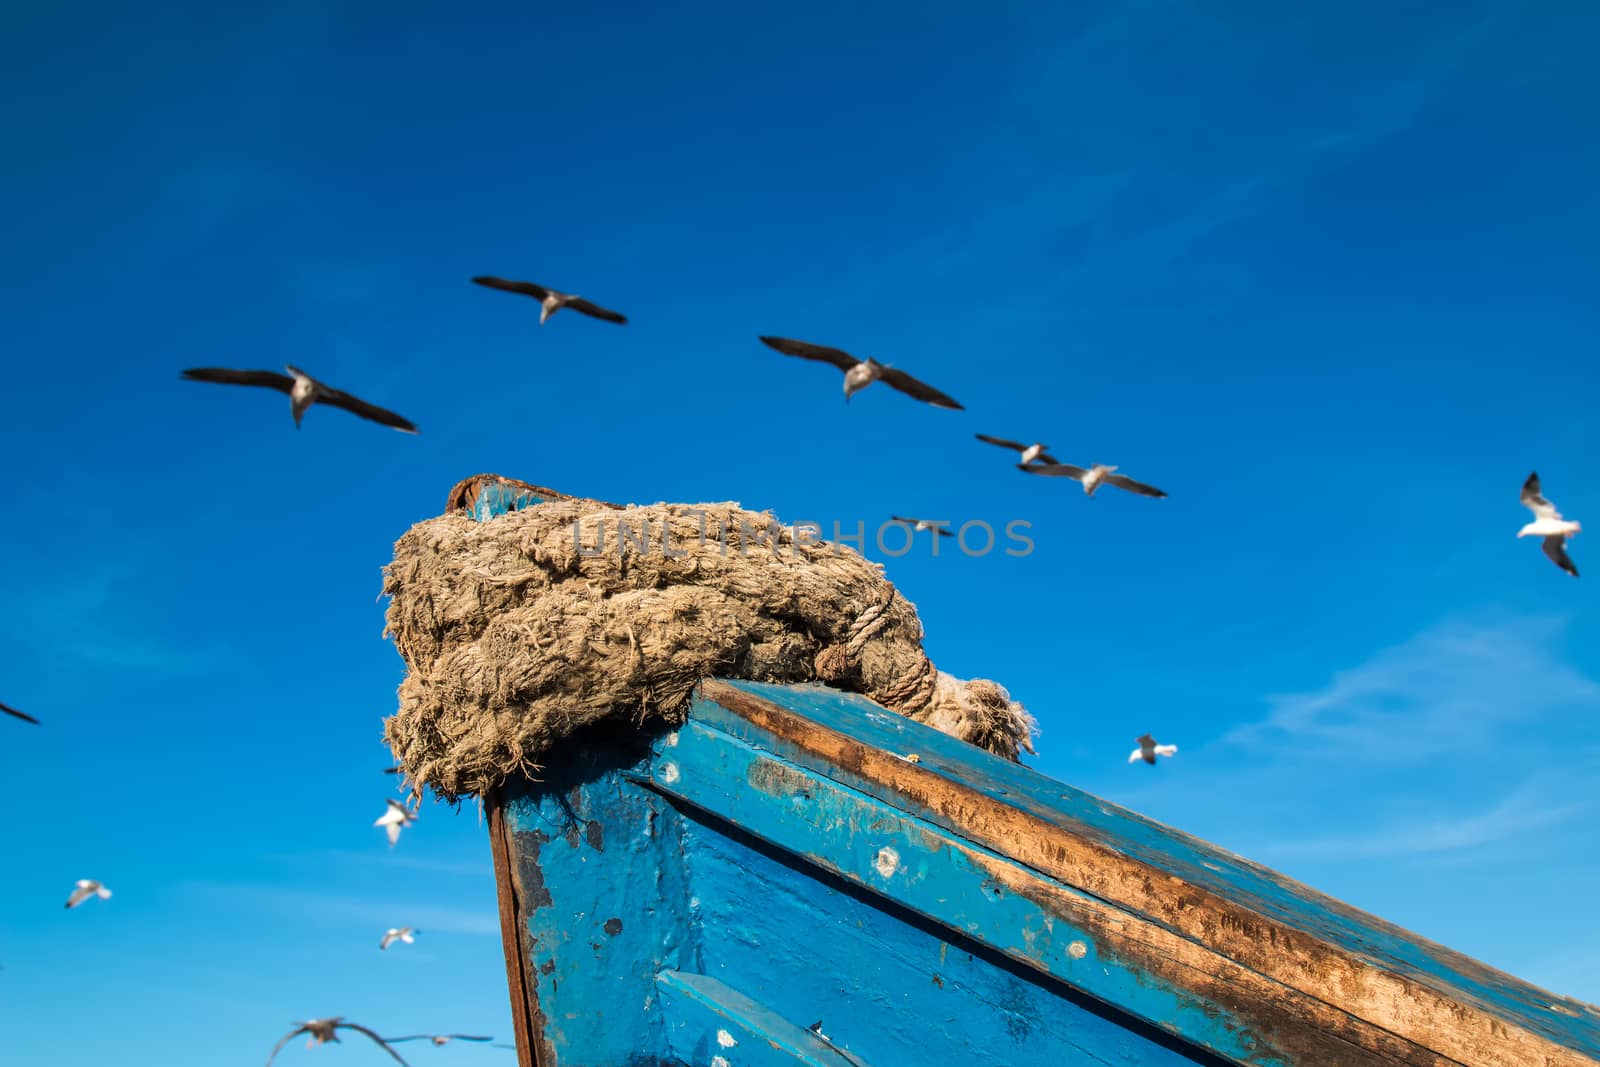 Detail of an old blue wooden fishing boat. Rope on the edge. Blue sky with light clouds in the background. Seagulls around the boat.